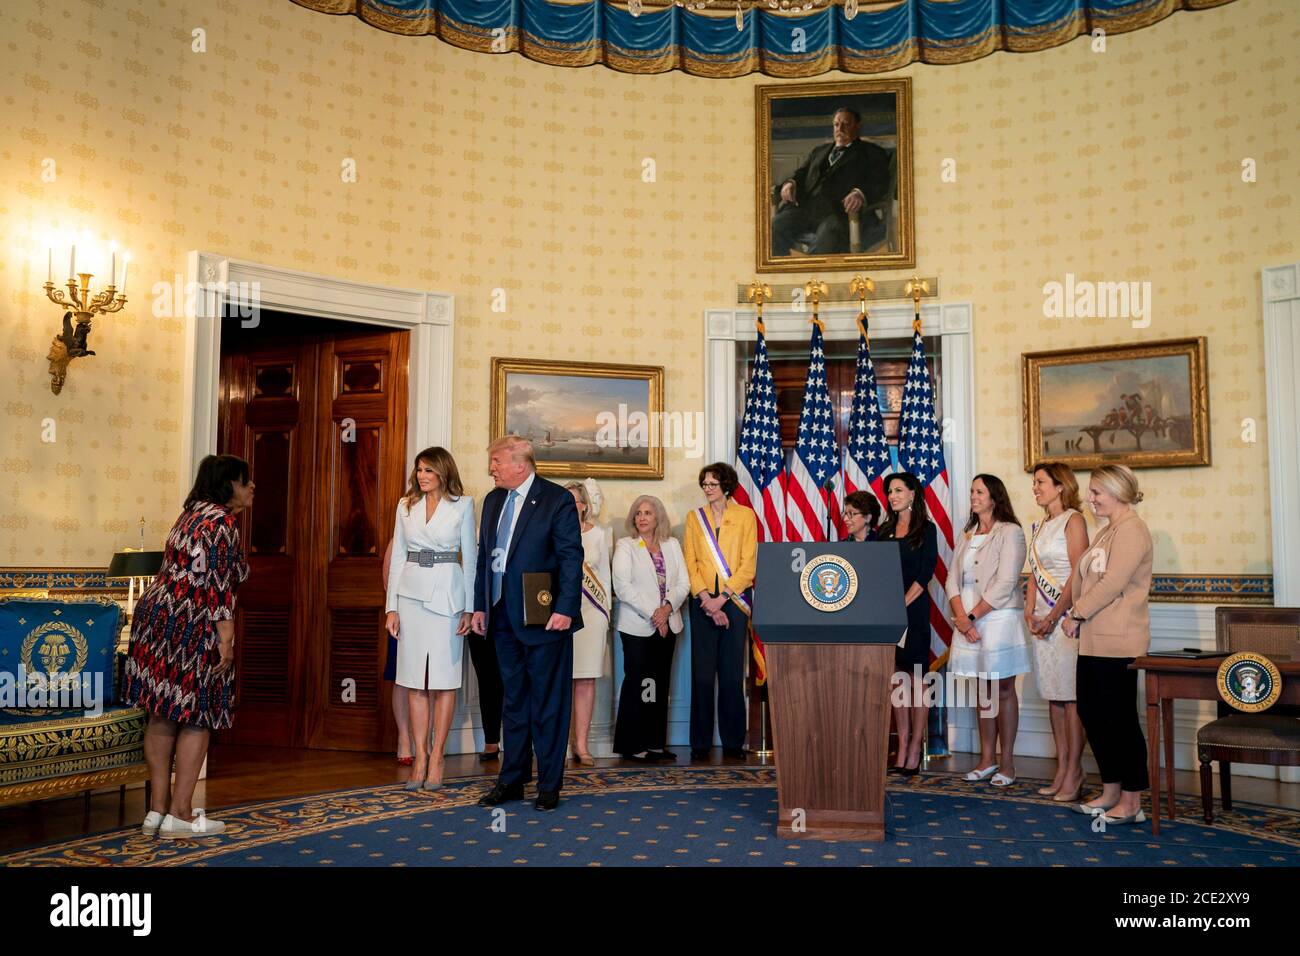 U.S. President Donald Trump acknowledges participants during an event marking the 100th Anniversary of the Ratification of the 19th Amendment in the Blue Room of the White House August 18, 2020 in Washington, DC. Stock Photo